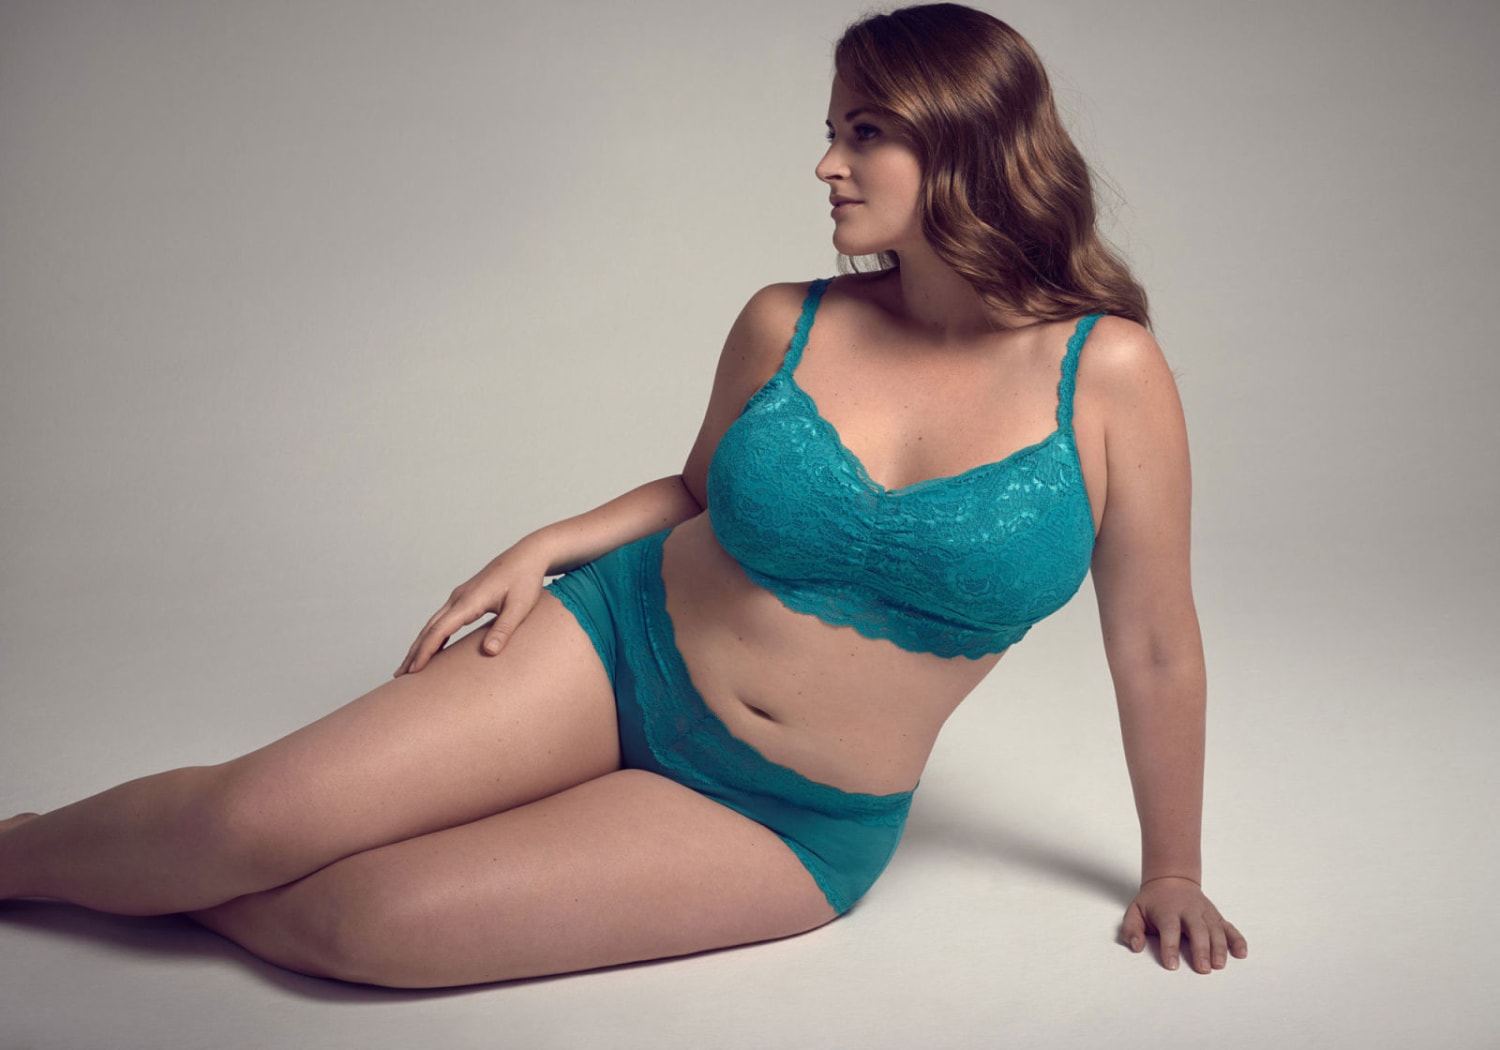 Cosabella 'extended' sizes looks to replace 'plus size'